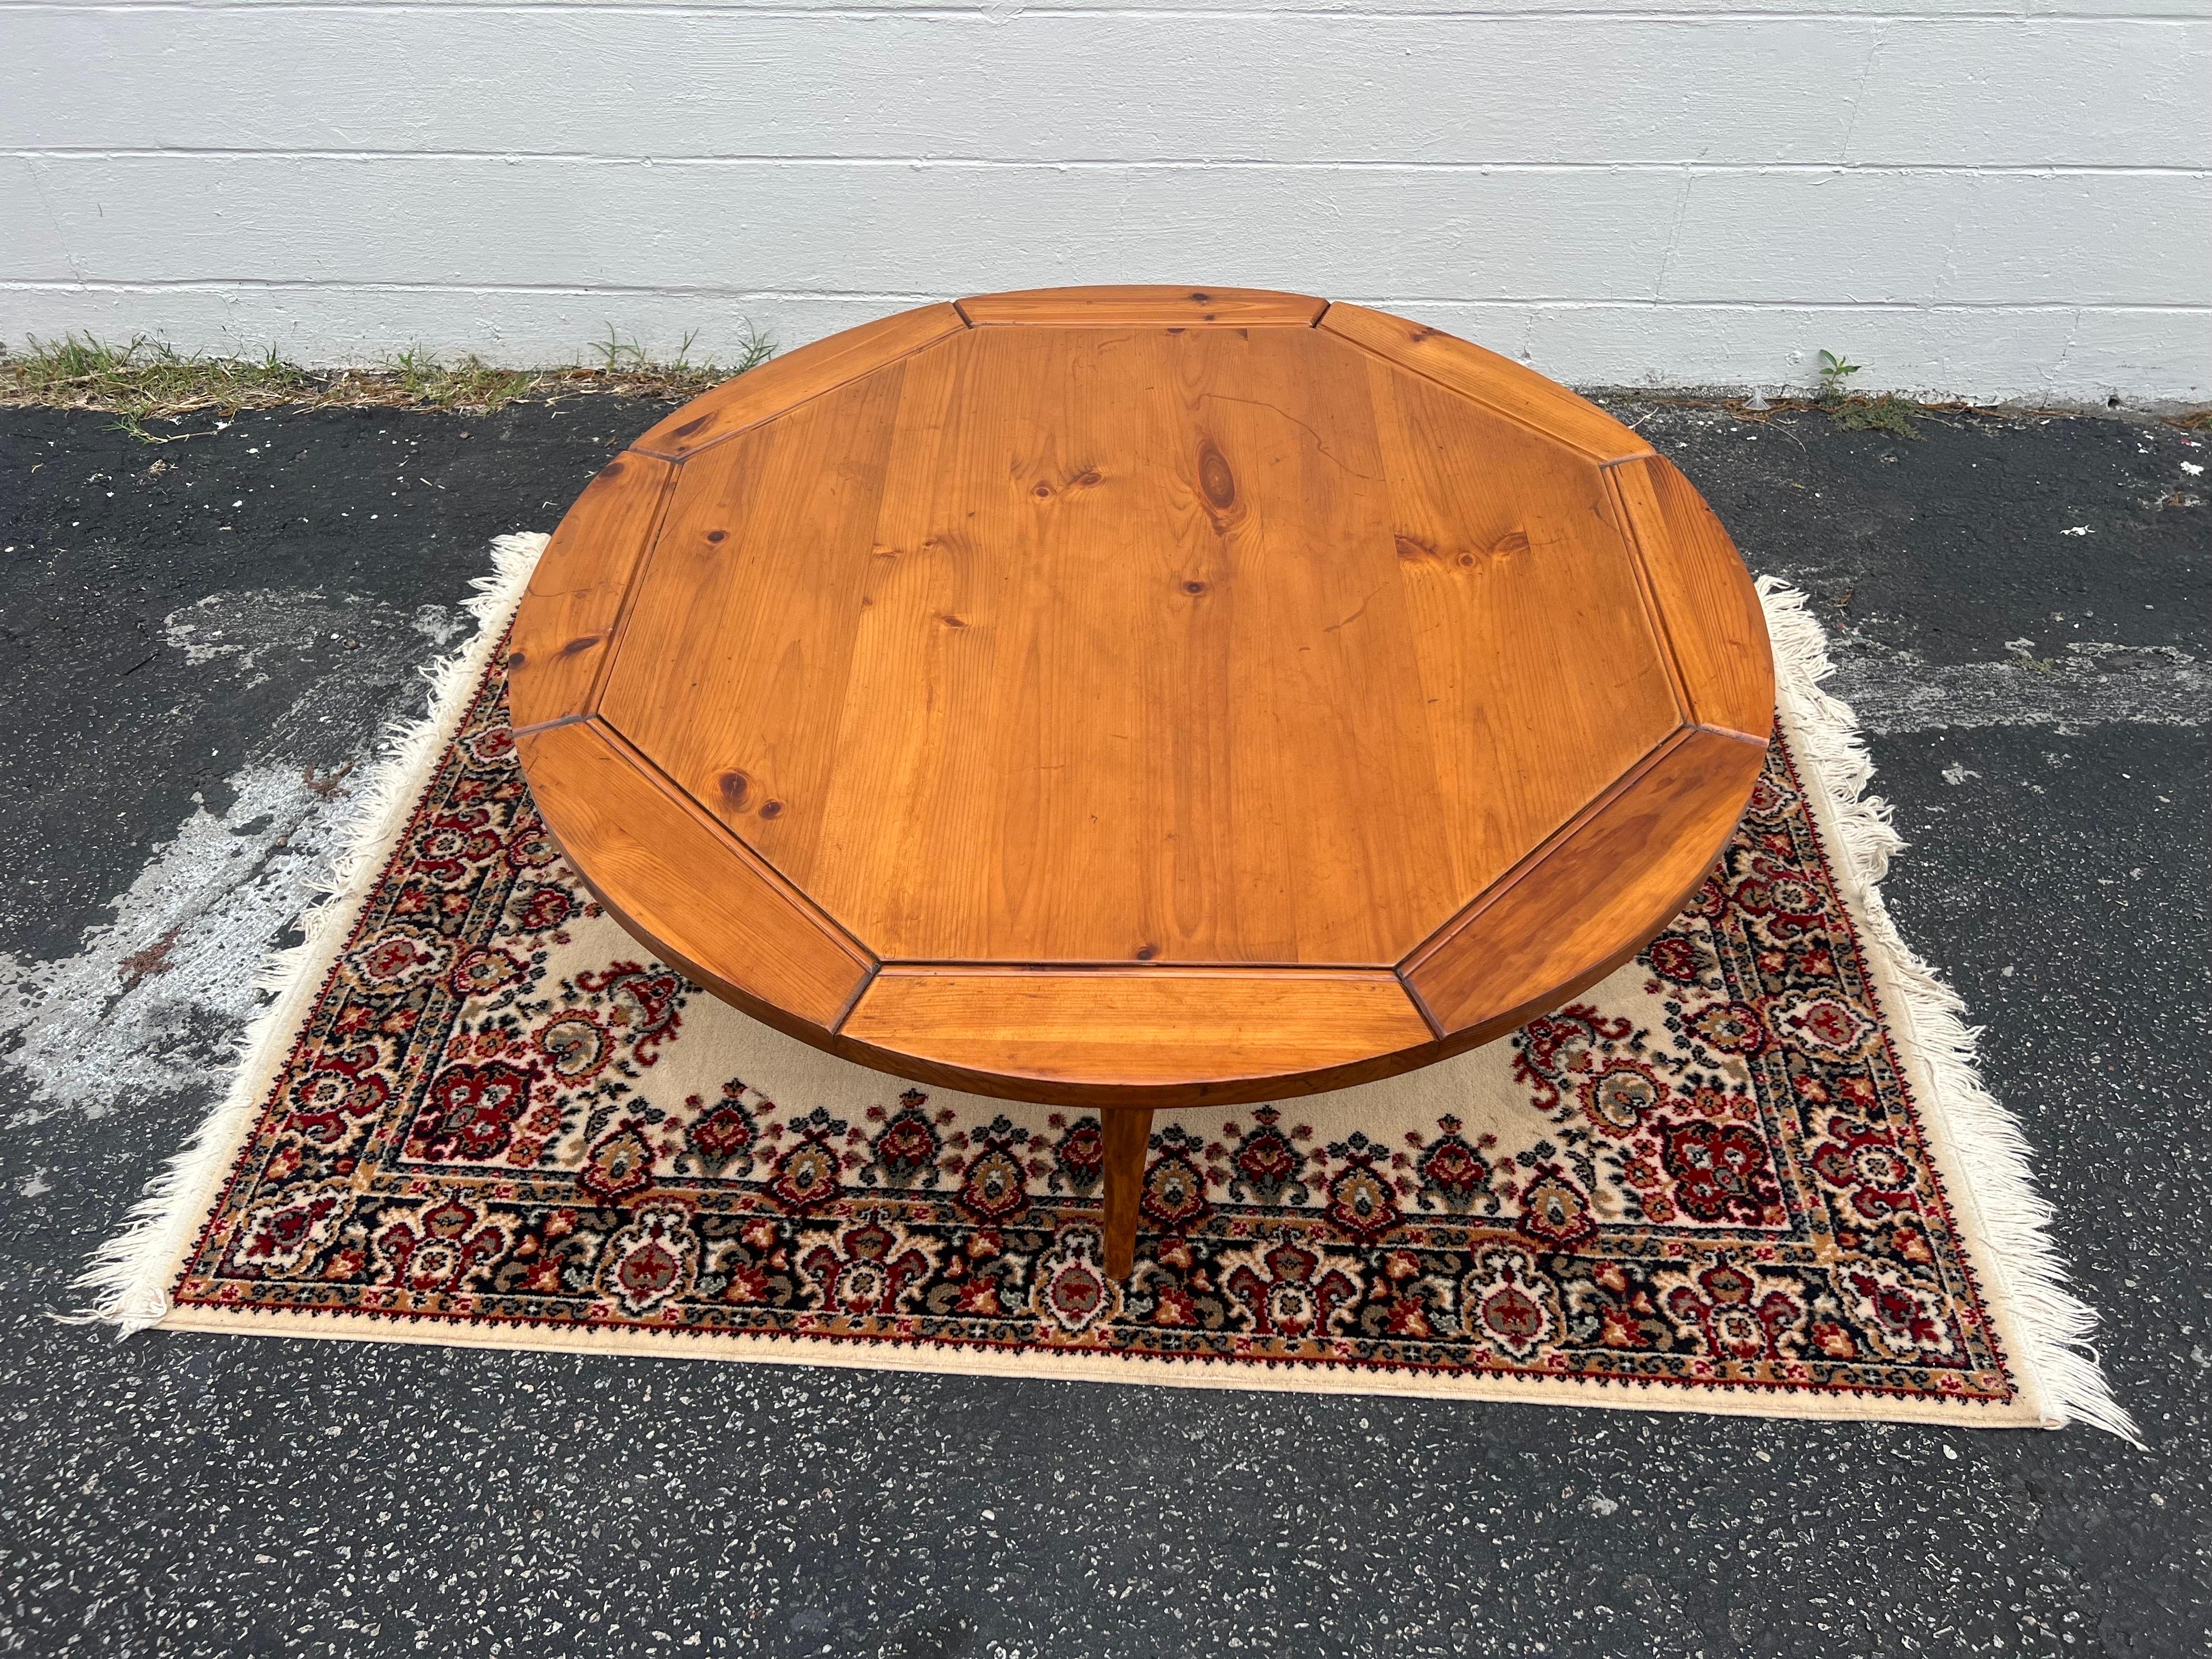 Newly refinished, this round pine coffee table mid-20th century is definitely unique. It has classic mid-Century modern lines with splayed leg’s except the top has grooves making it appear to be octagonal in shape, when it is actually round. The